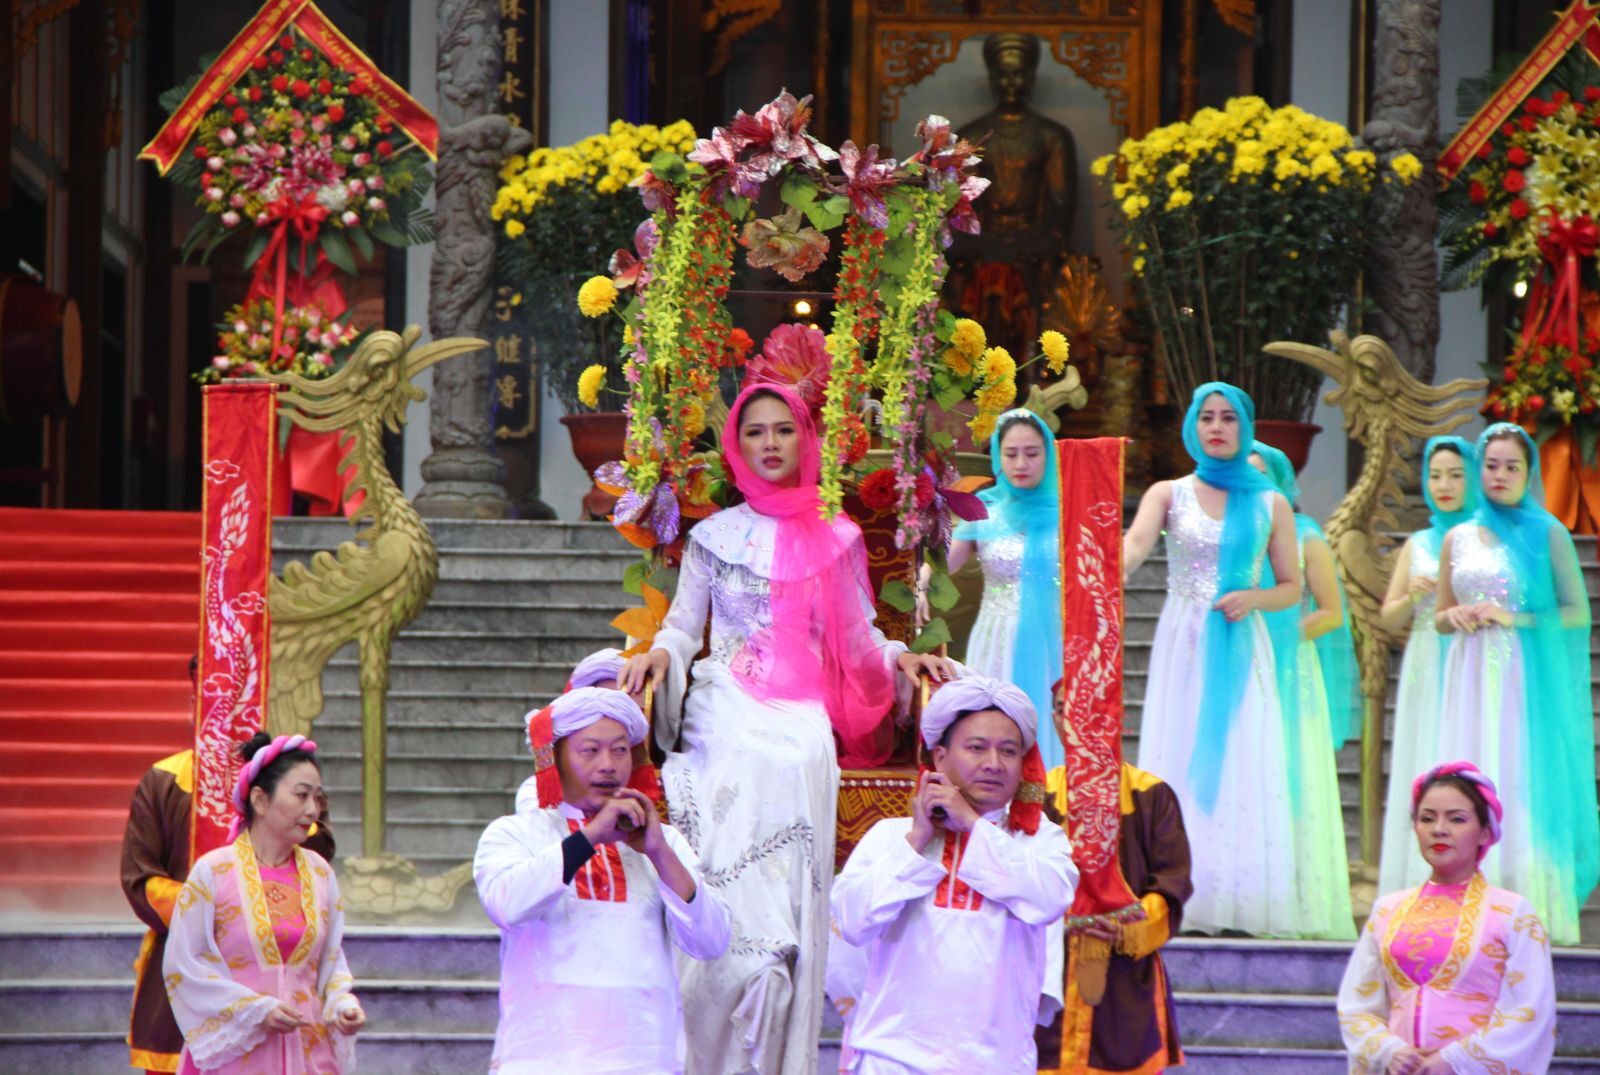 The festival is opened with the procession of Princess Huyen Tran